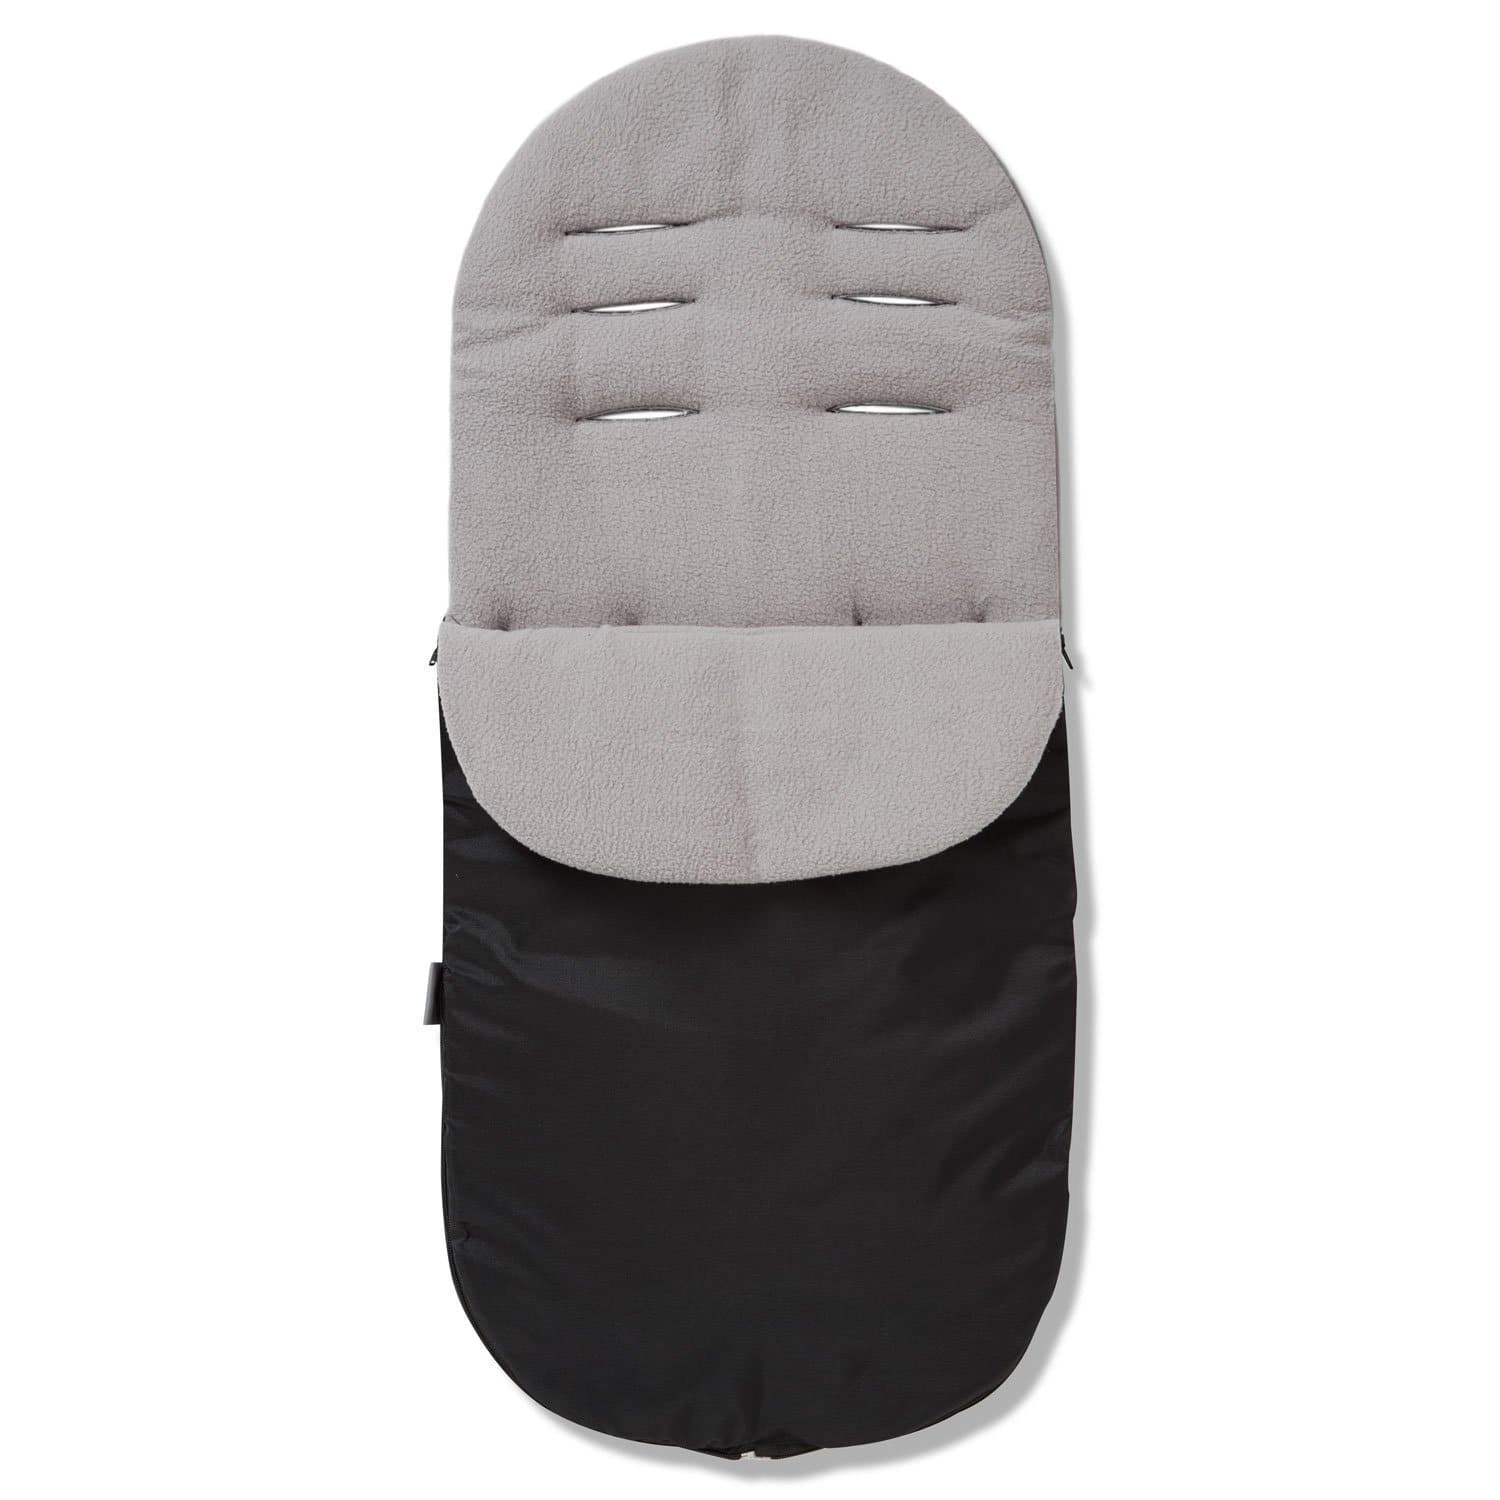 Footmuff / Cosy Toes Compatible with Little Shield - Grey / Fits All Models | For Your Little One